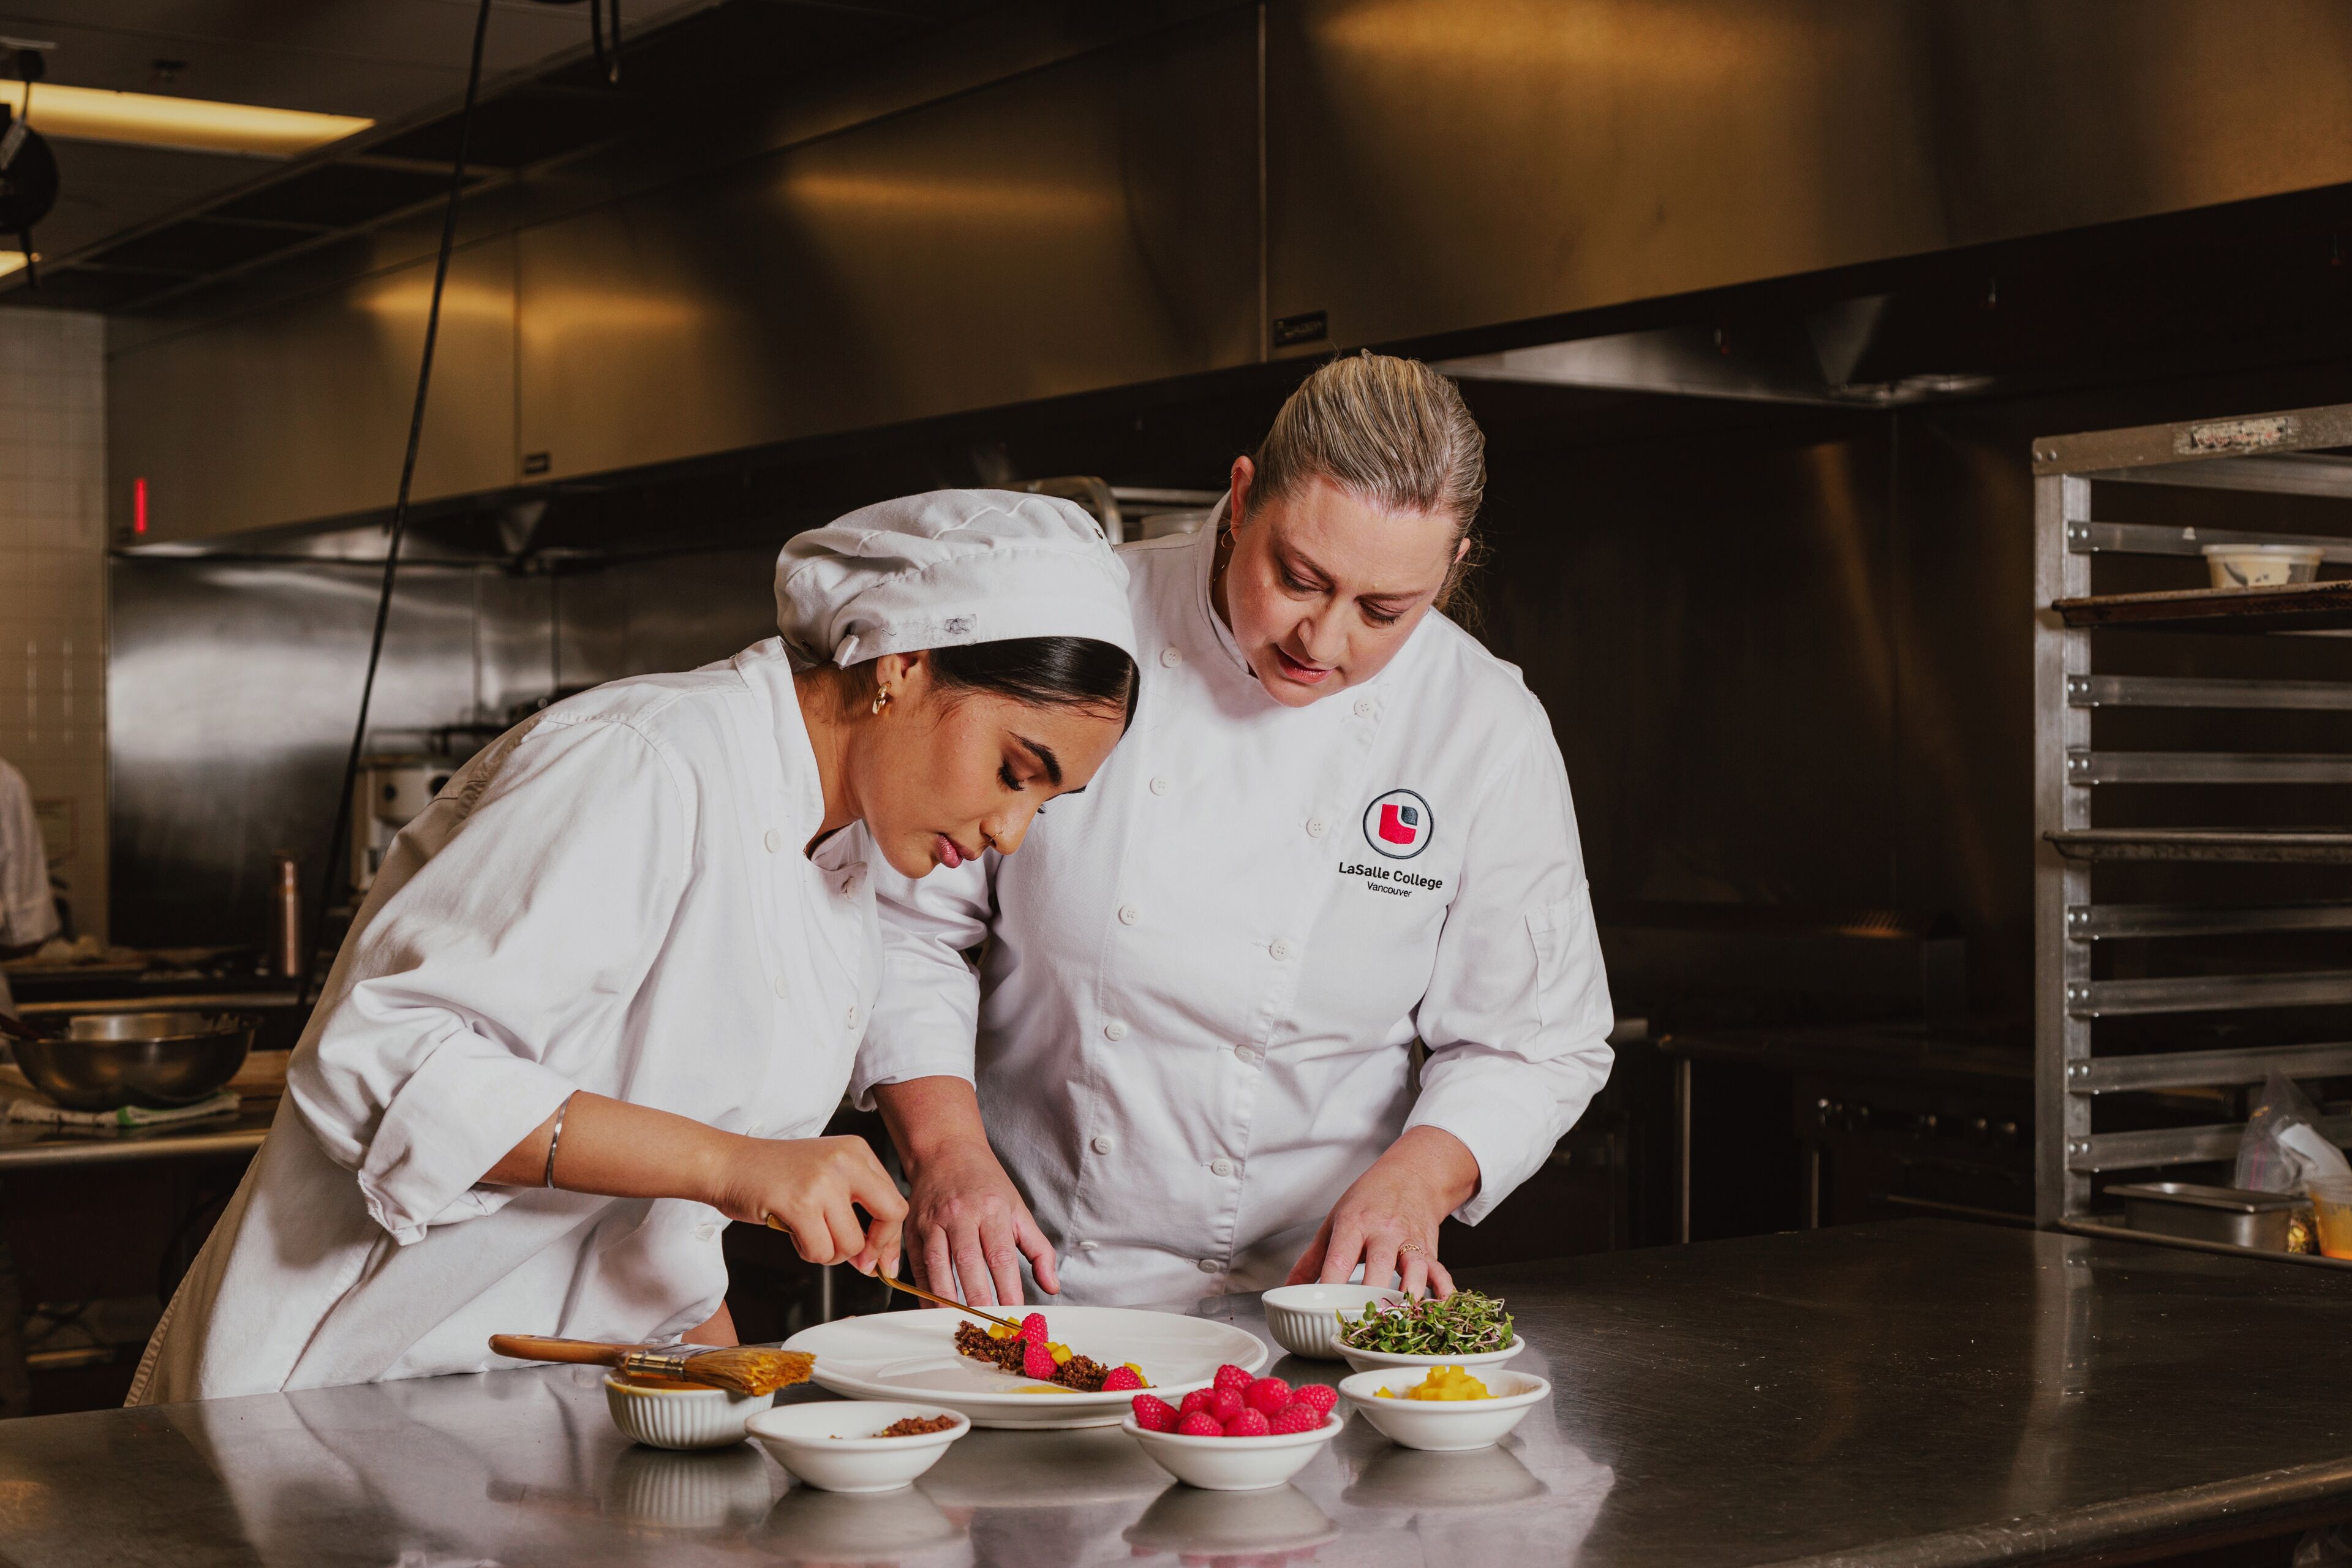 A seasoned chef guides a young cook in the art of plating, combining expertise with fresh talent.